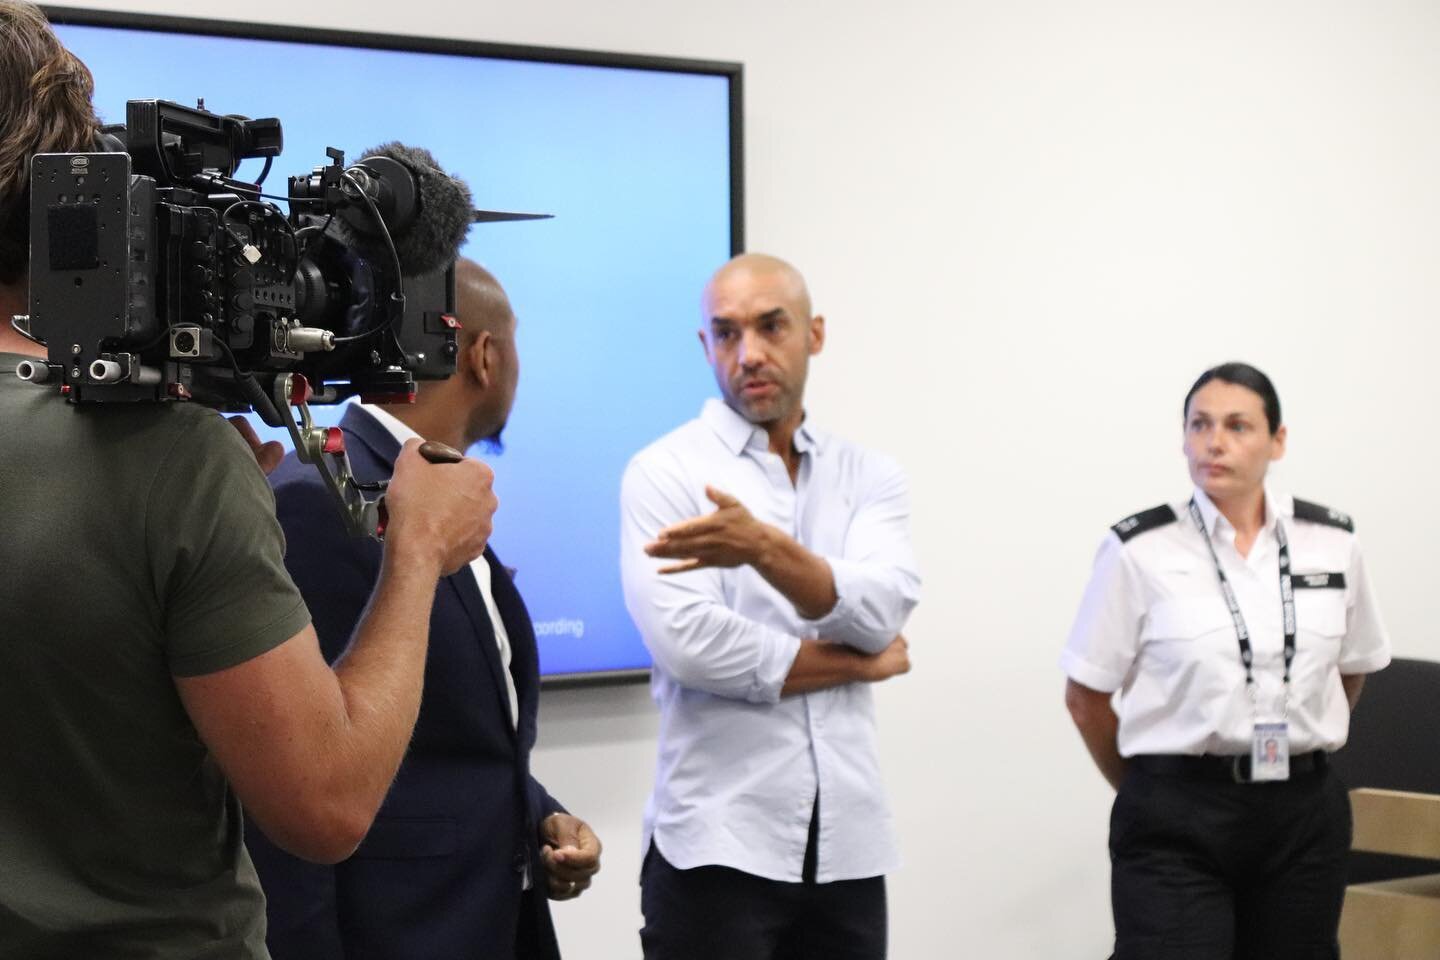 Watch Stop and Search: Policing The Streets? will airing this Thursday at 8.30pm on ITV1 nationally where @alexberesfordtv visited some of our police training around stop and search. Tune in @itv @itv 

#ITVTonight @ITVTonight